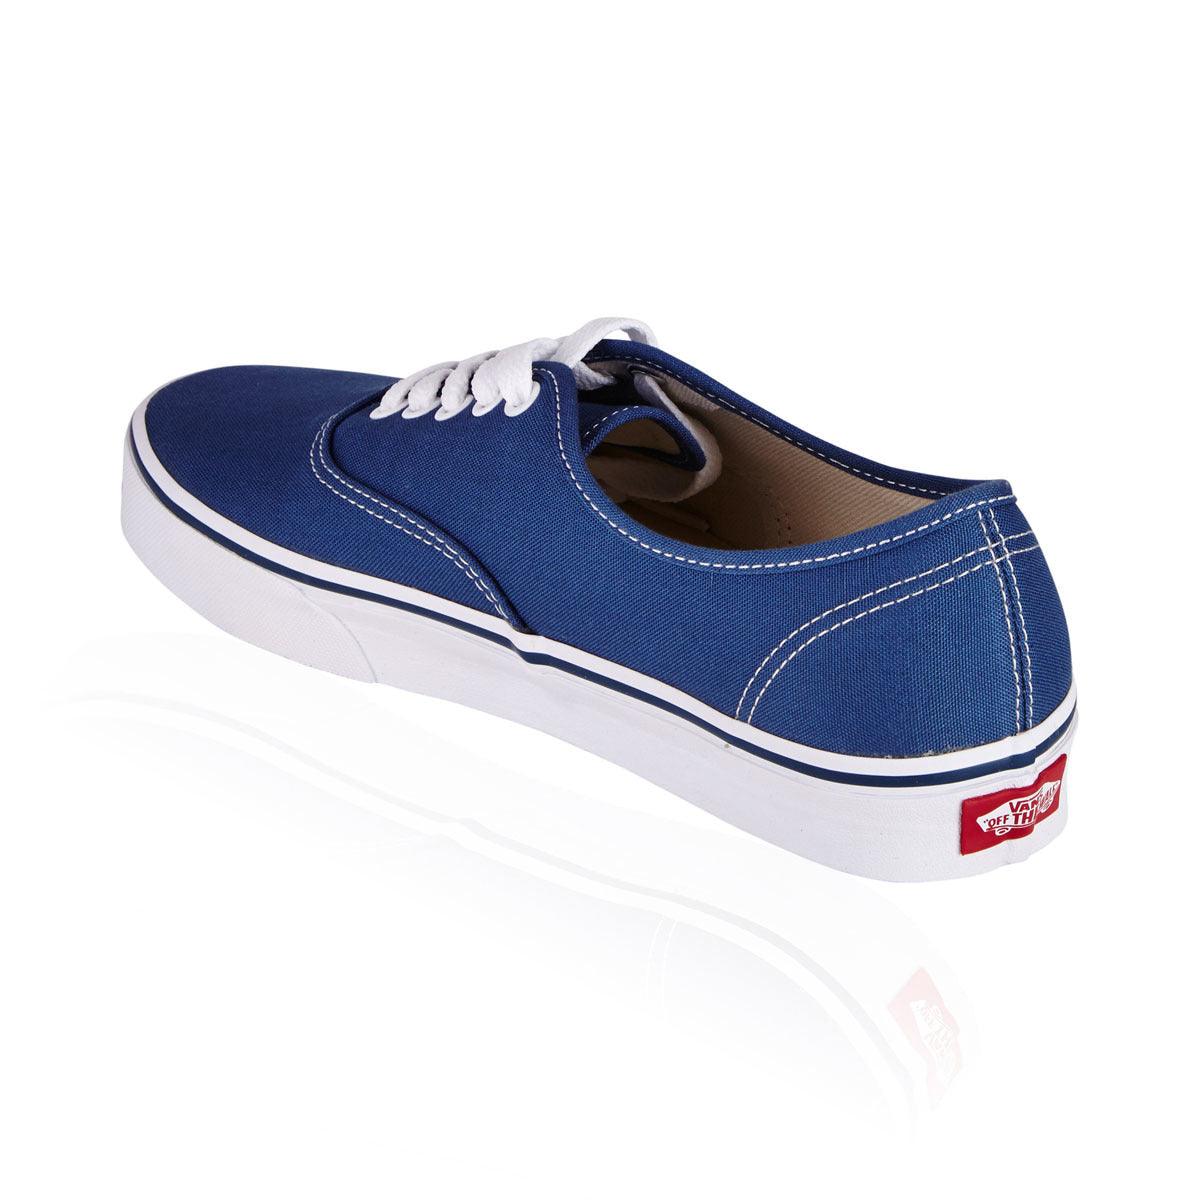 Vans Authentic Lace Up Sneakers Blue | Sneakers blue, Vans authentic, Blue  vans